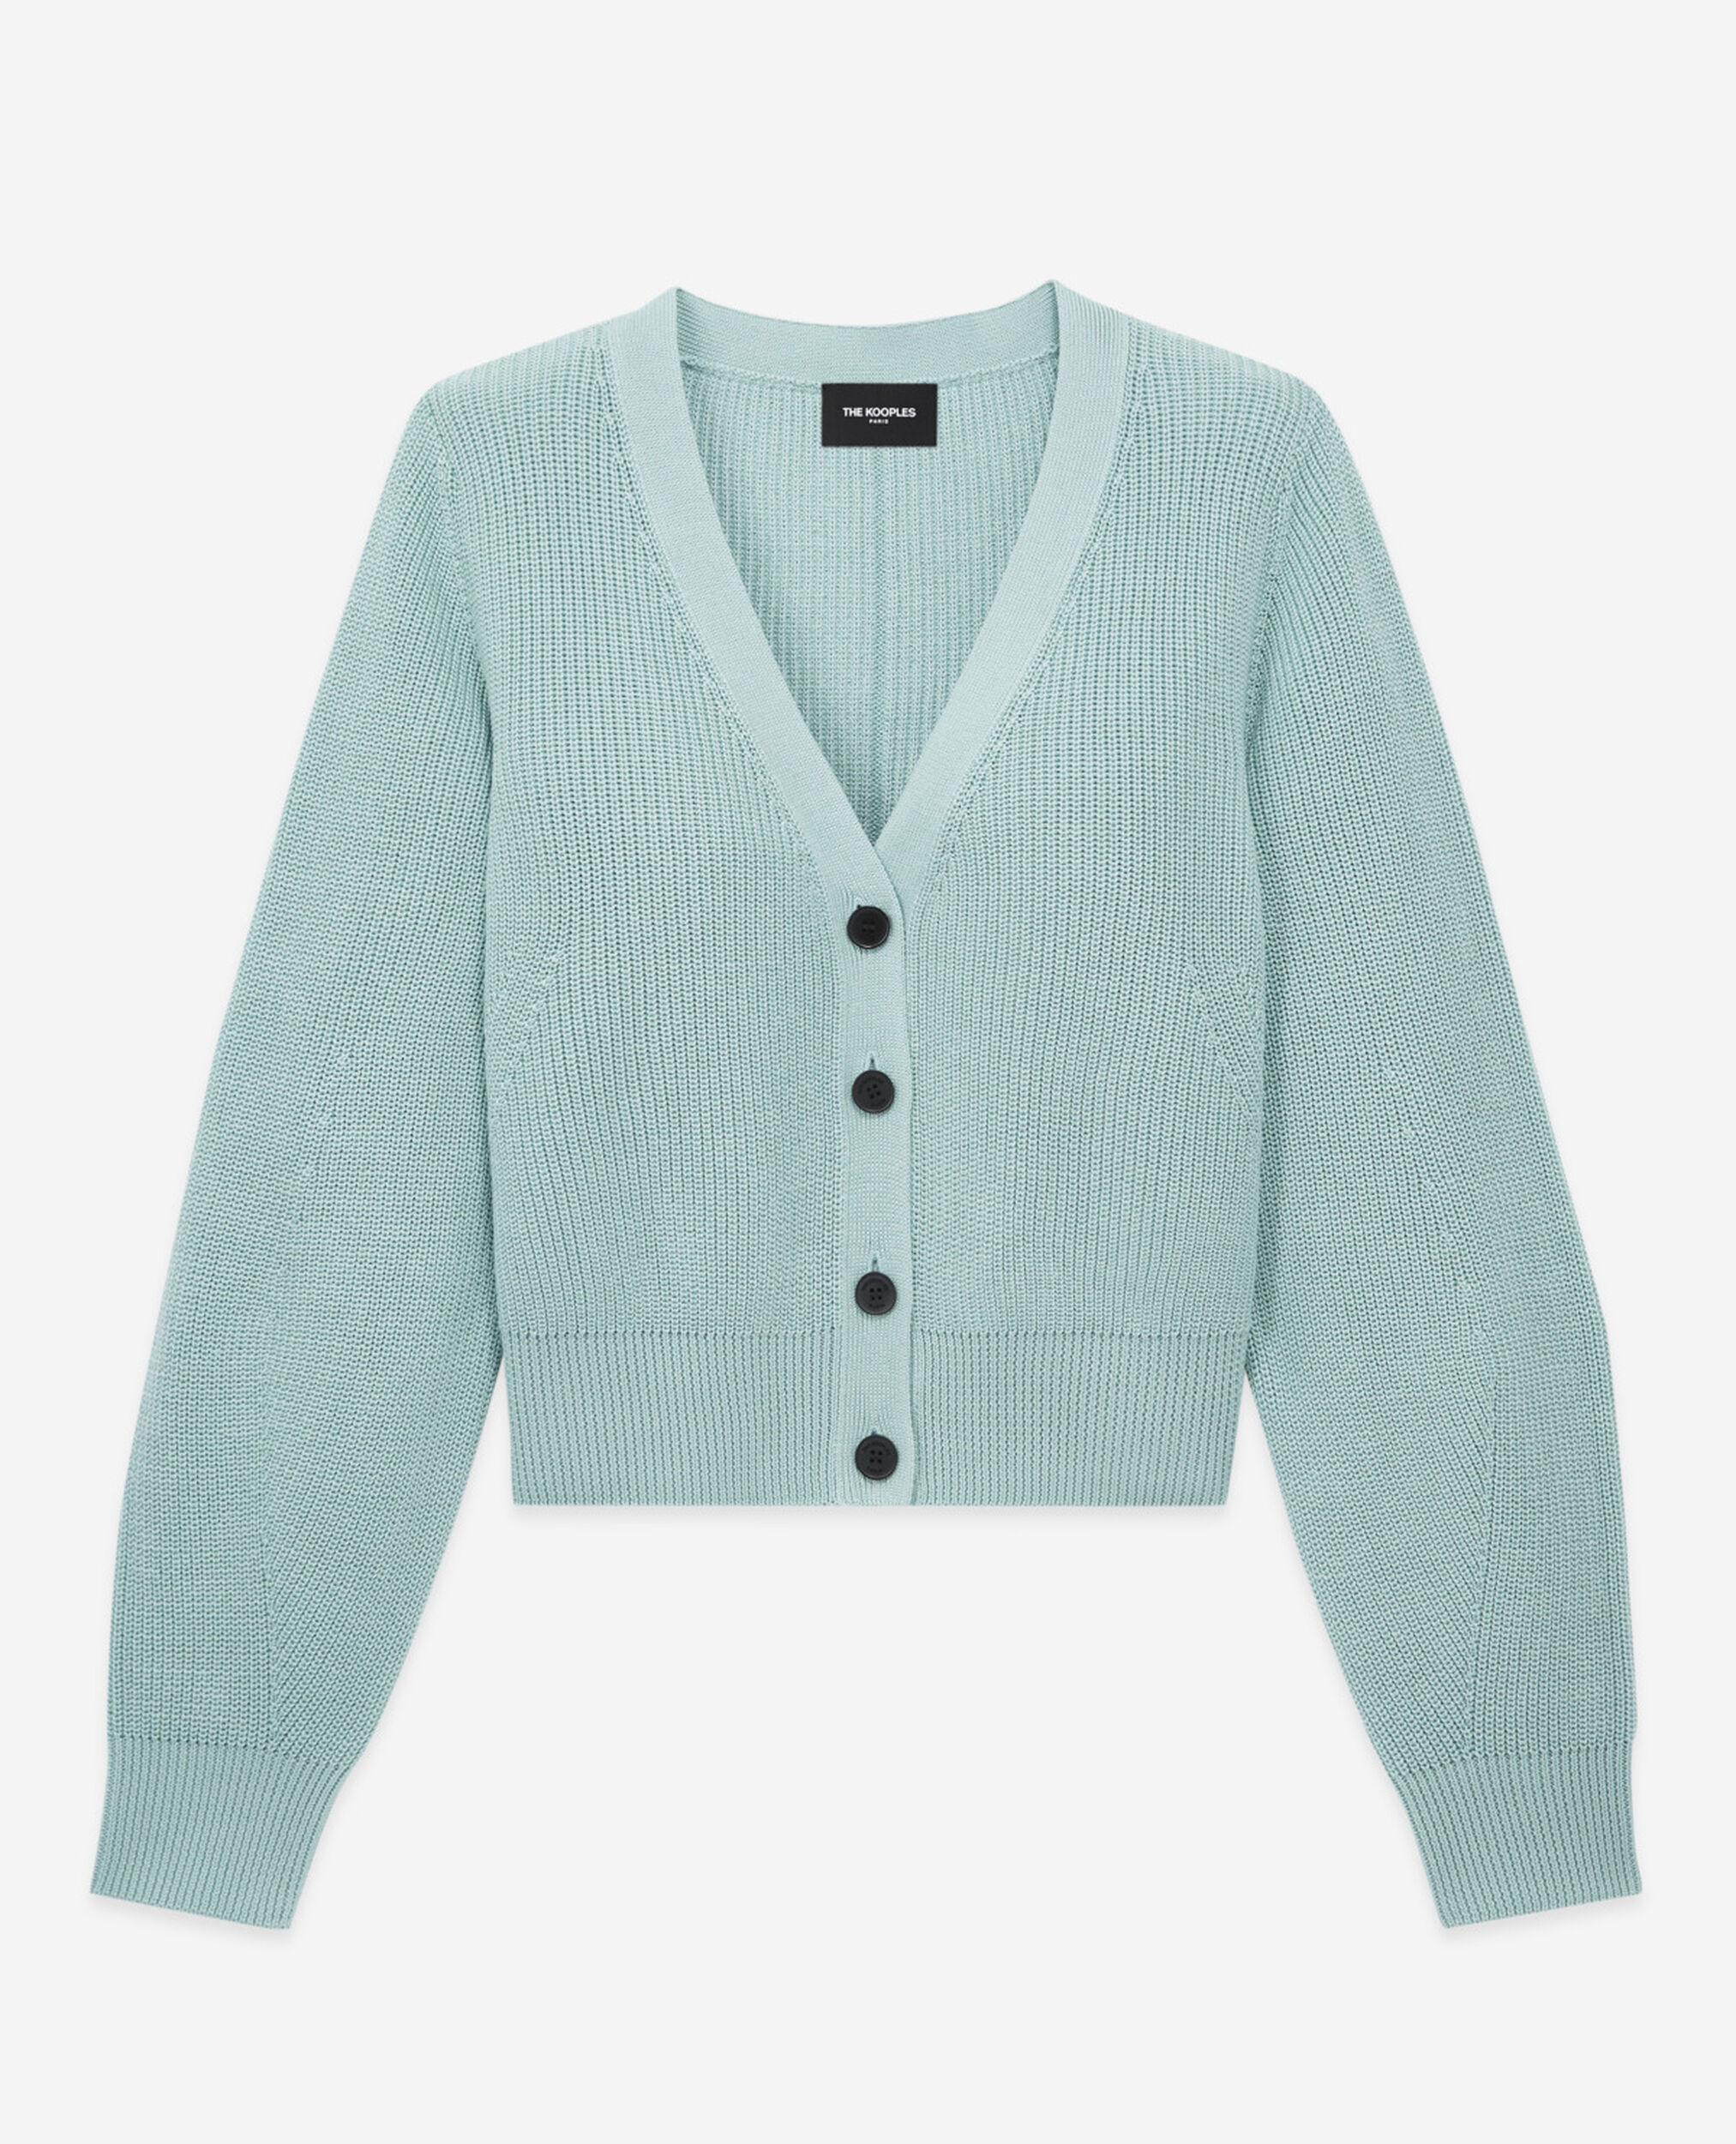 Cardigan coton vert court manches bouffantes, GREEN, hi-res image number null